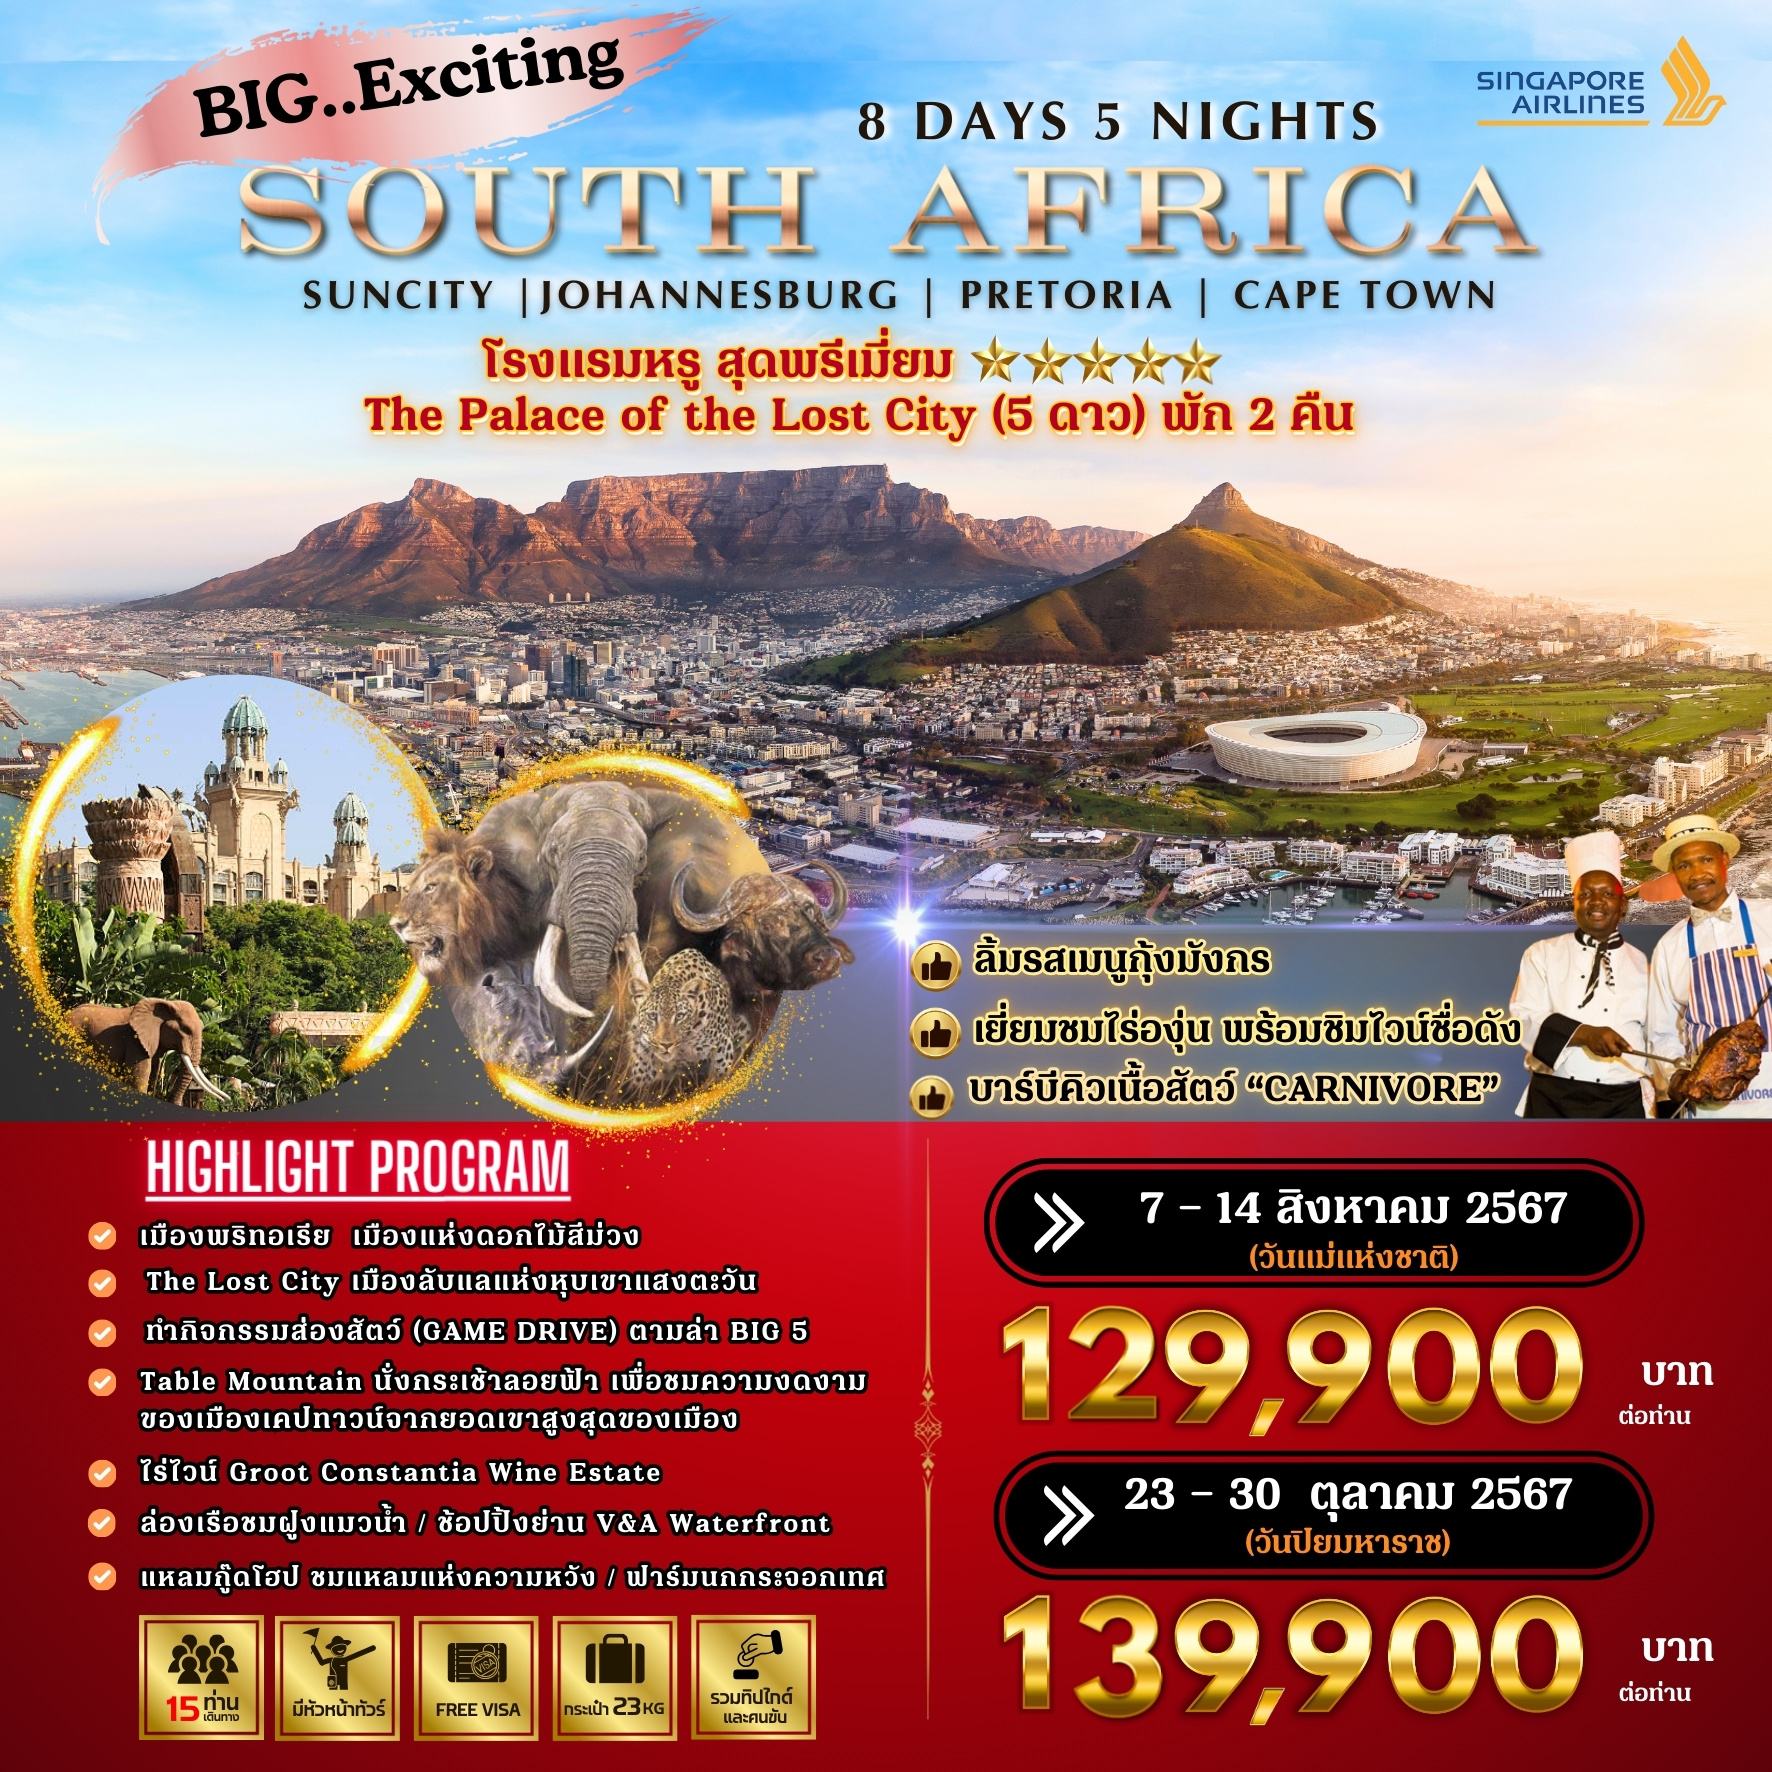 Exciting South Africa 8 วัน 5 คืน by SINGAPORE AIRLINES